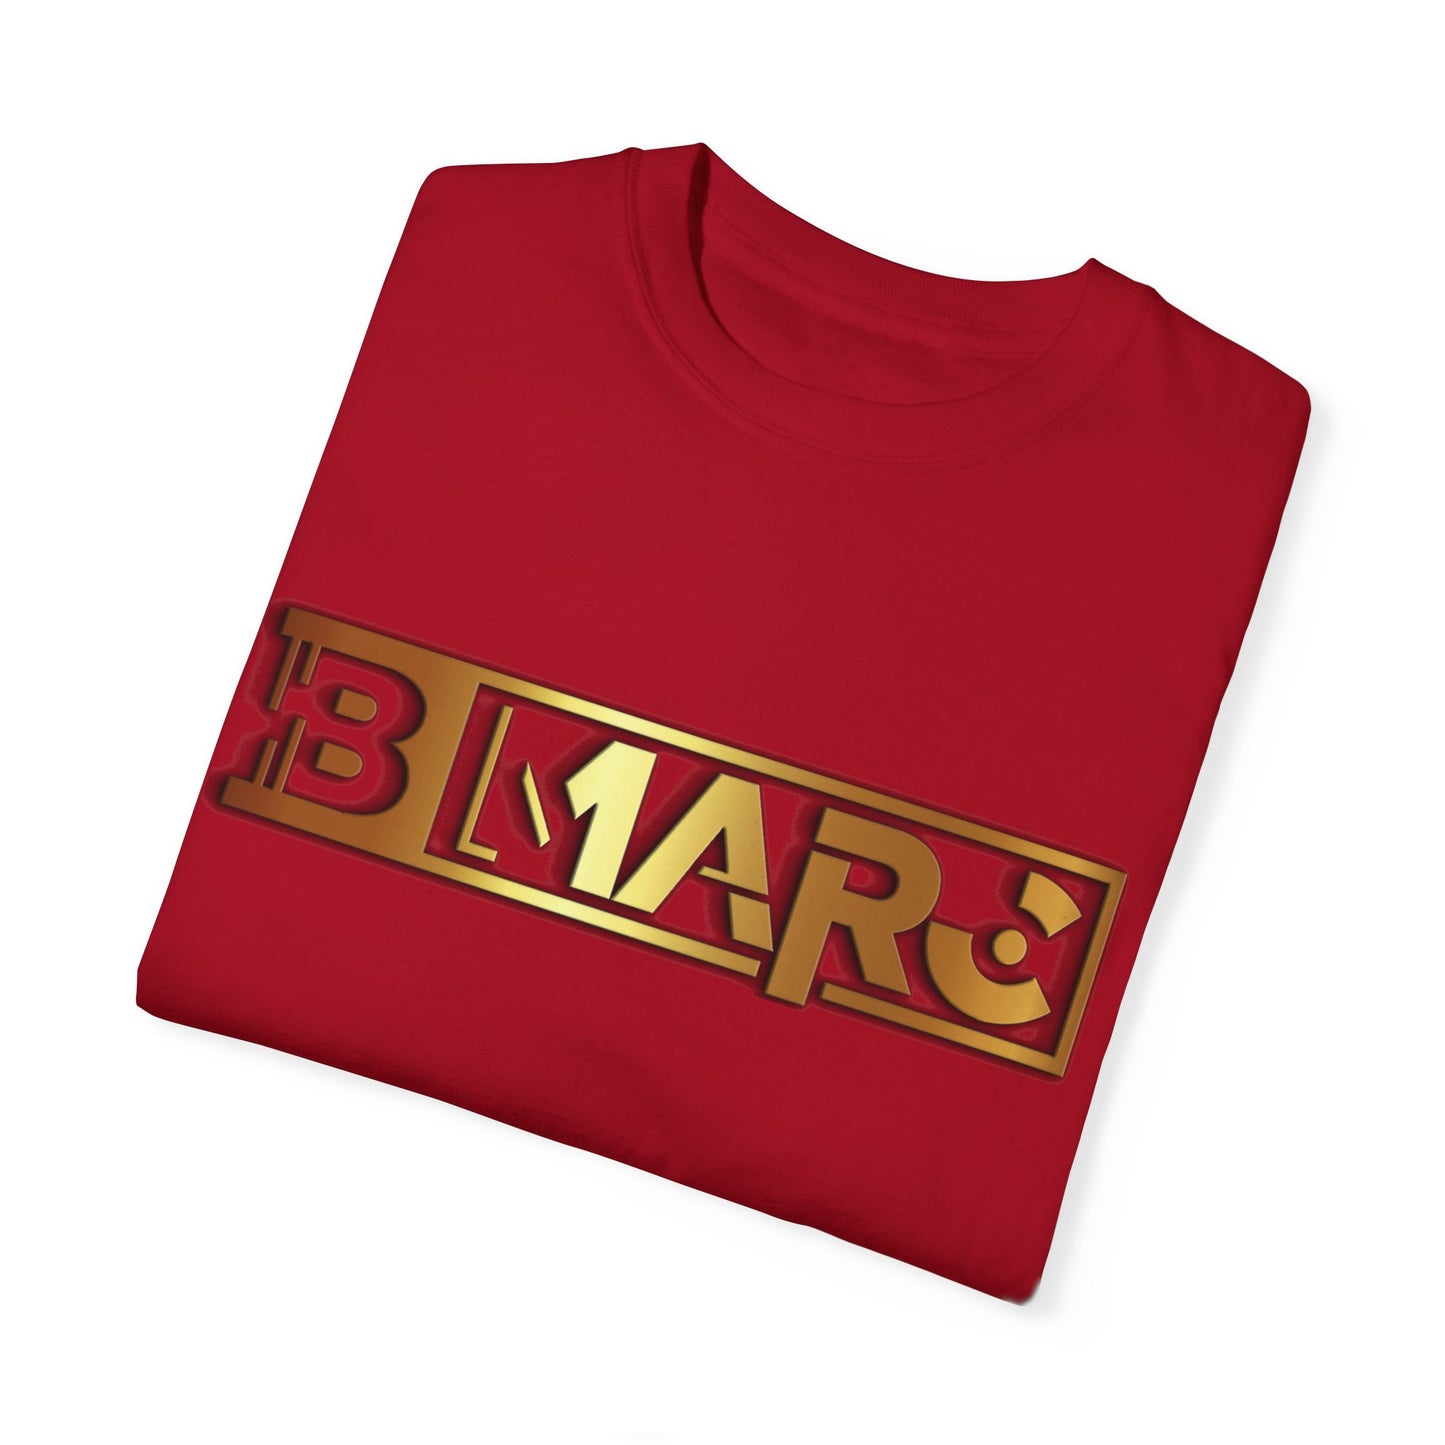 B-MARC COLLECTION T-shirt